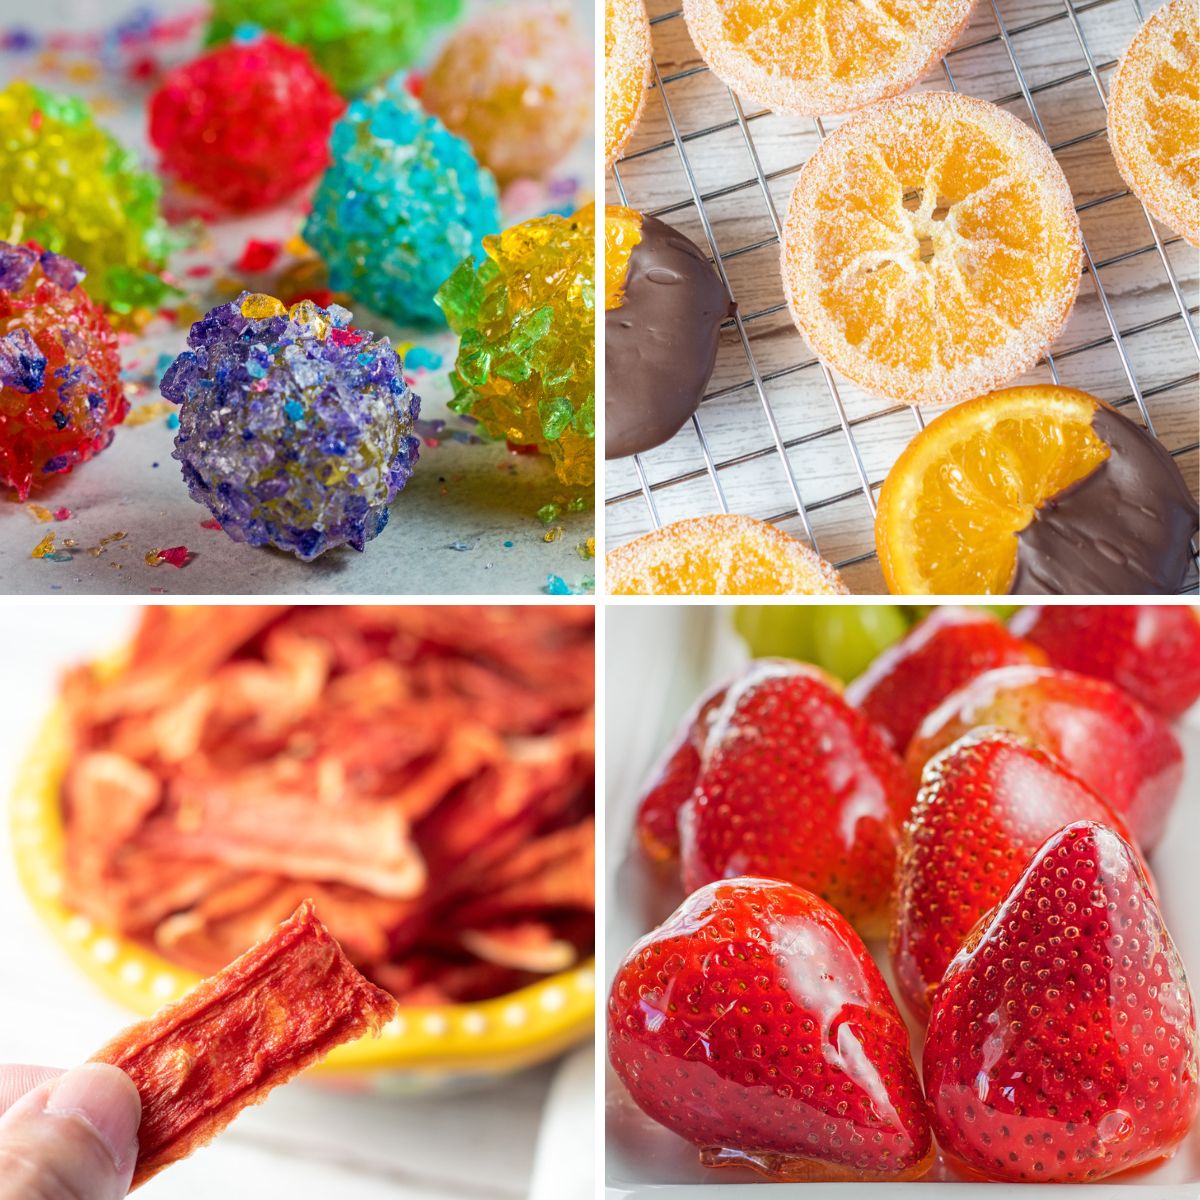 Best candied fruit recipes to make for desserts, cake decorating, cupcake toppers, and more.